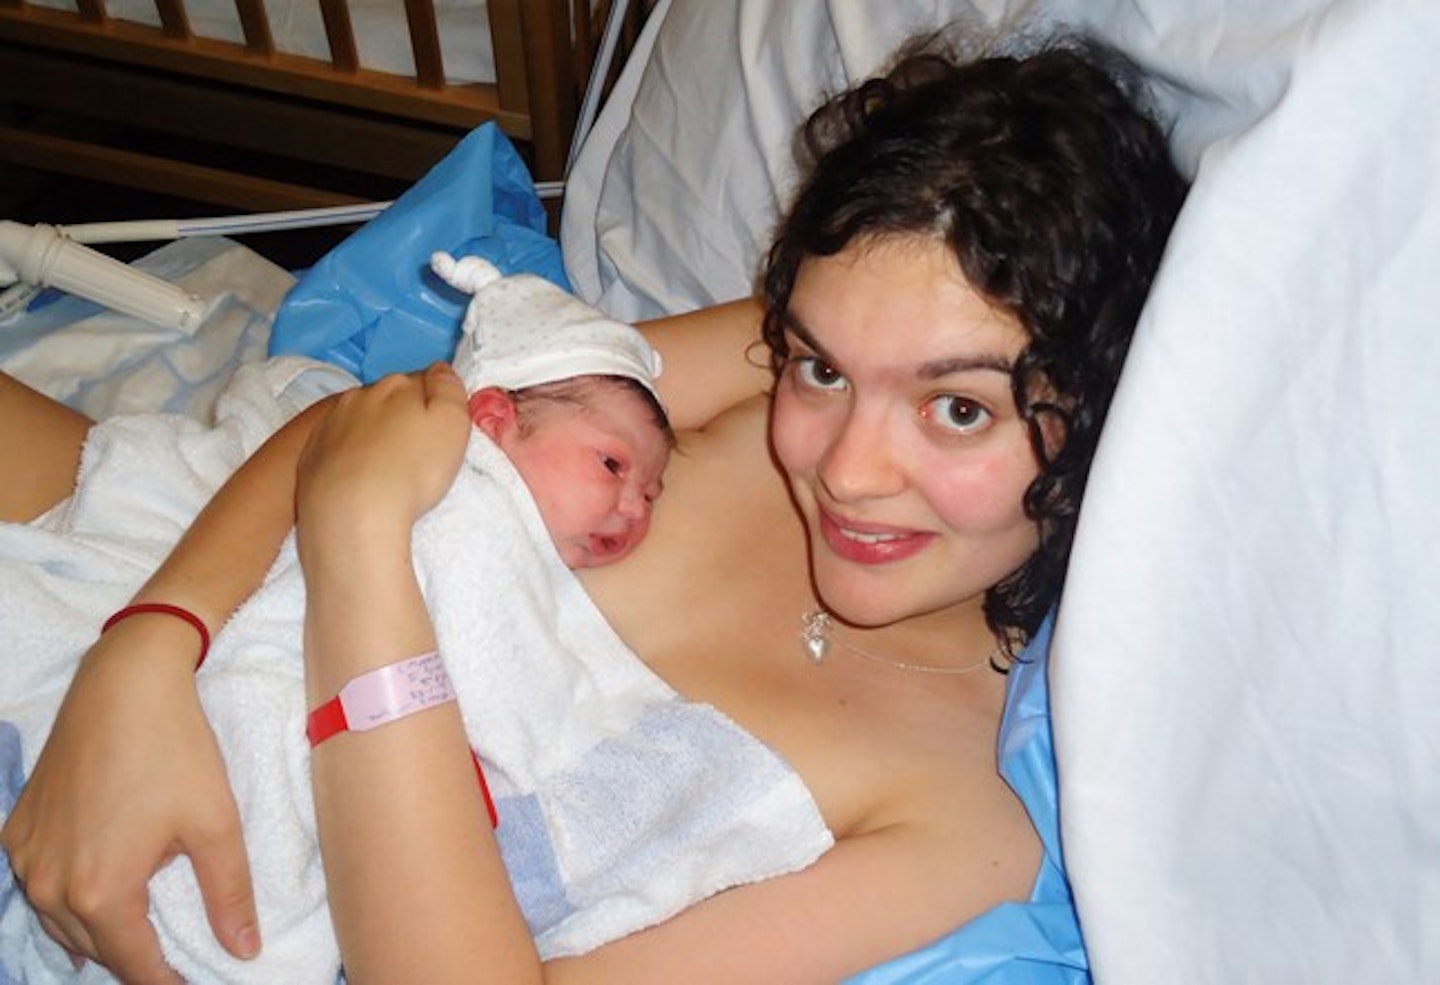 I gave birth in a midwife-led unit: Shea's story